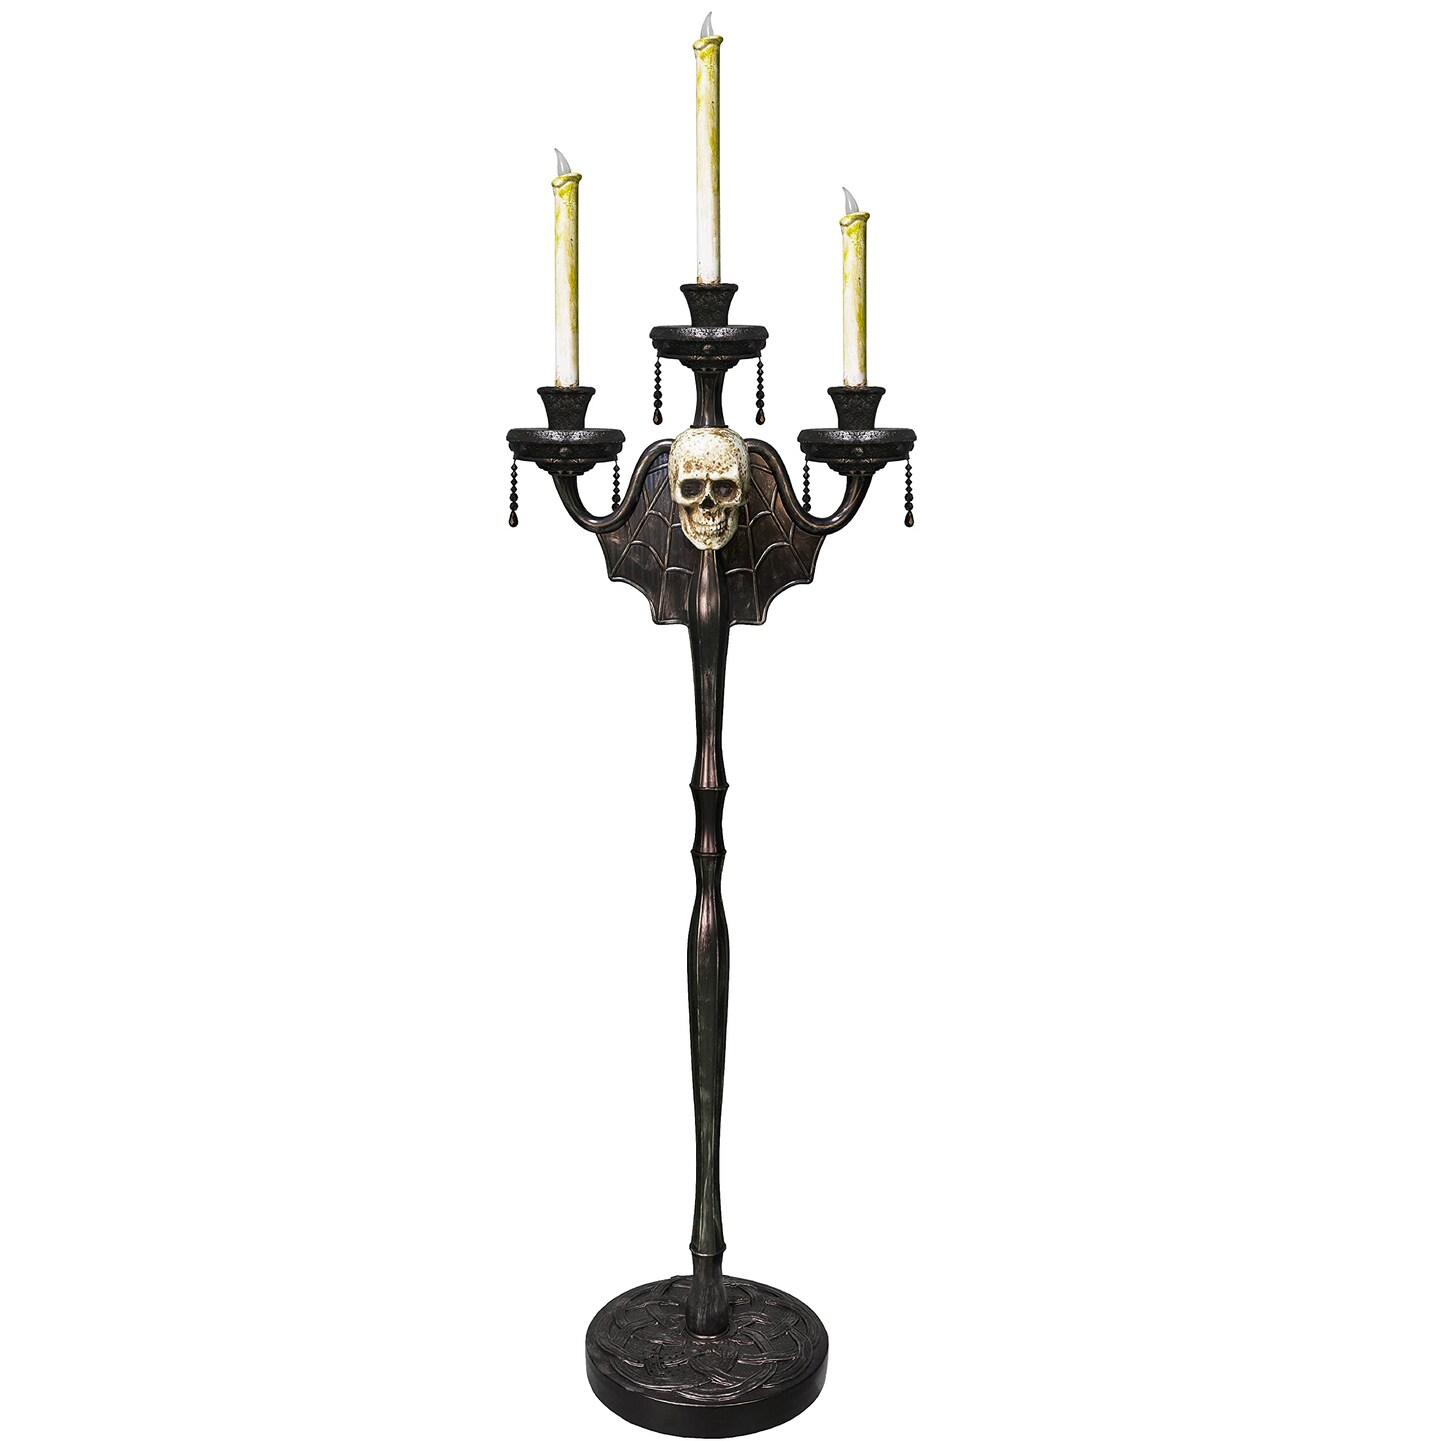 Animated Halloween Candelabra Decoration - Creepy Gothic Haunted Mansion Black Skull Floating Candle Holder Party Decorations Prop